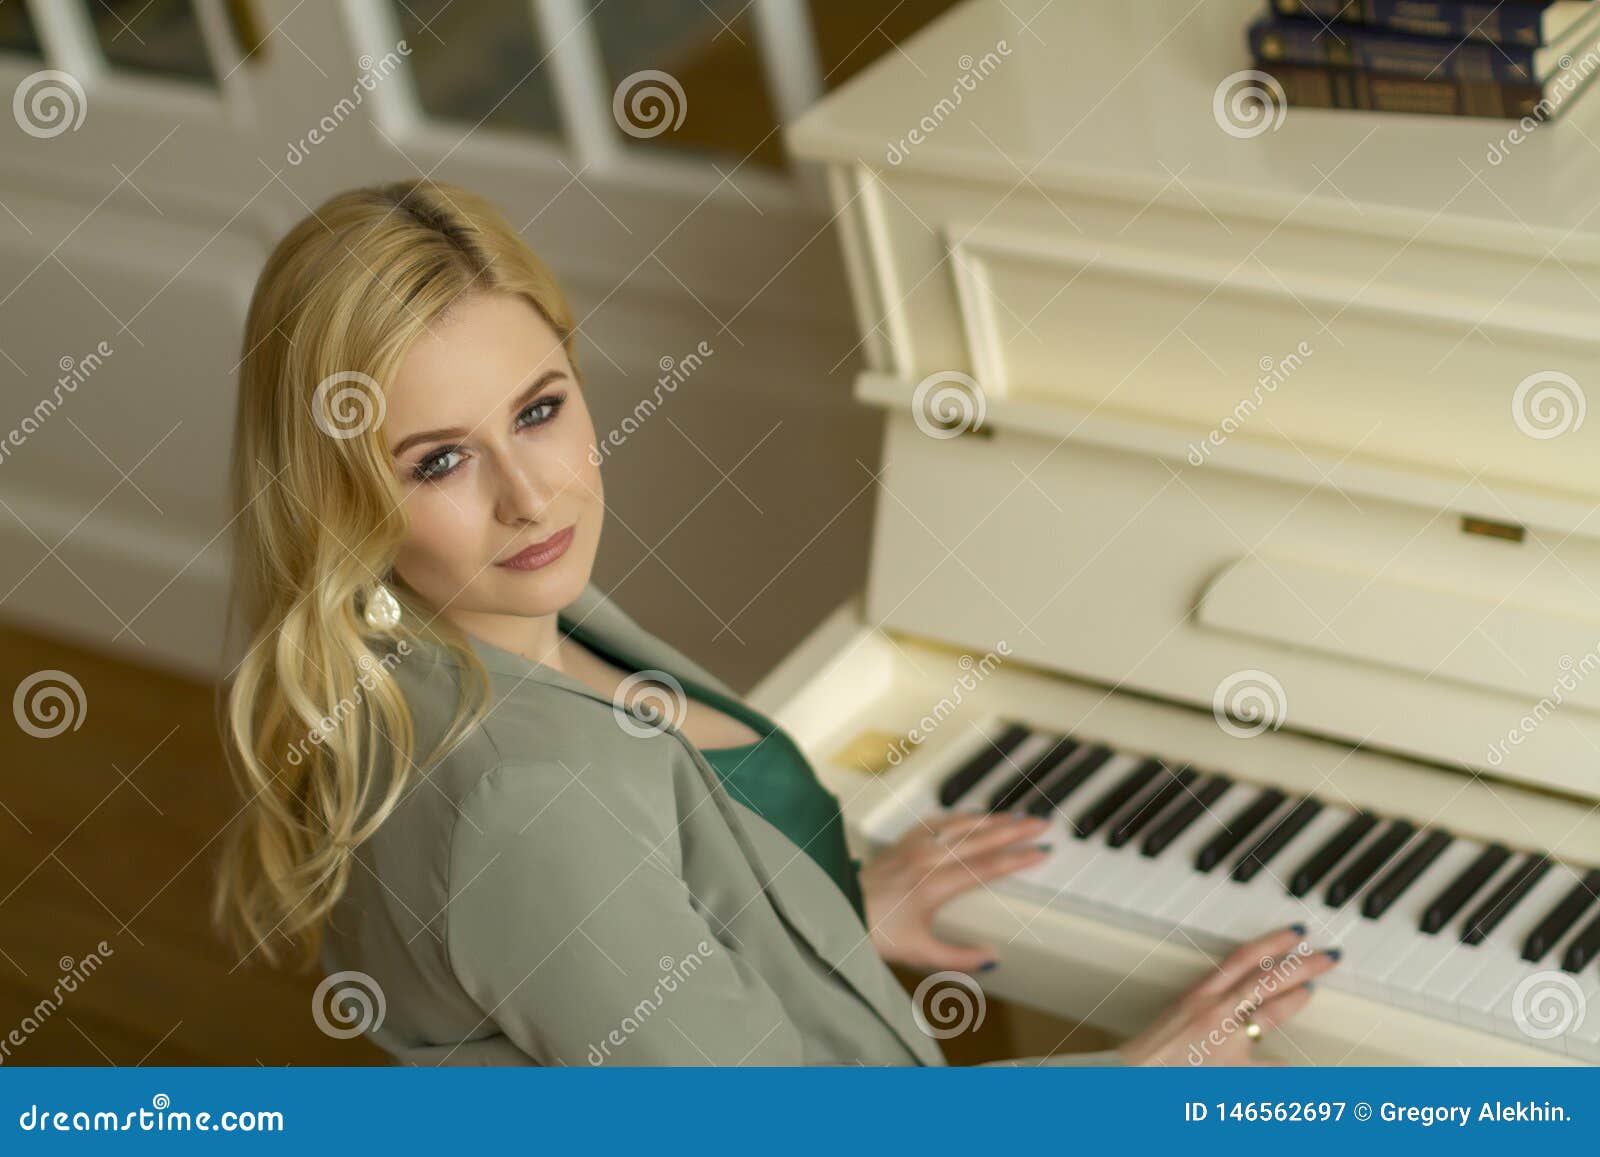 piano player blonde hair